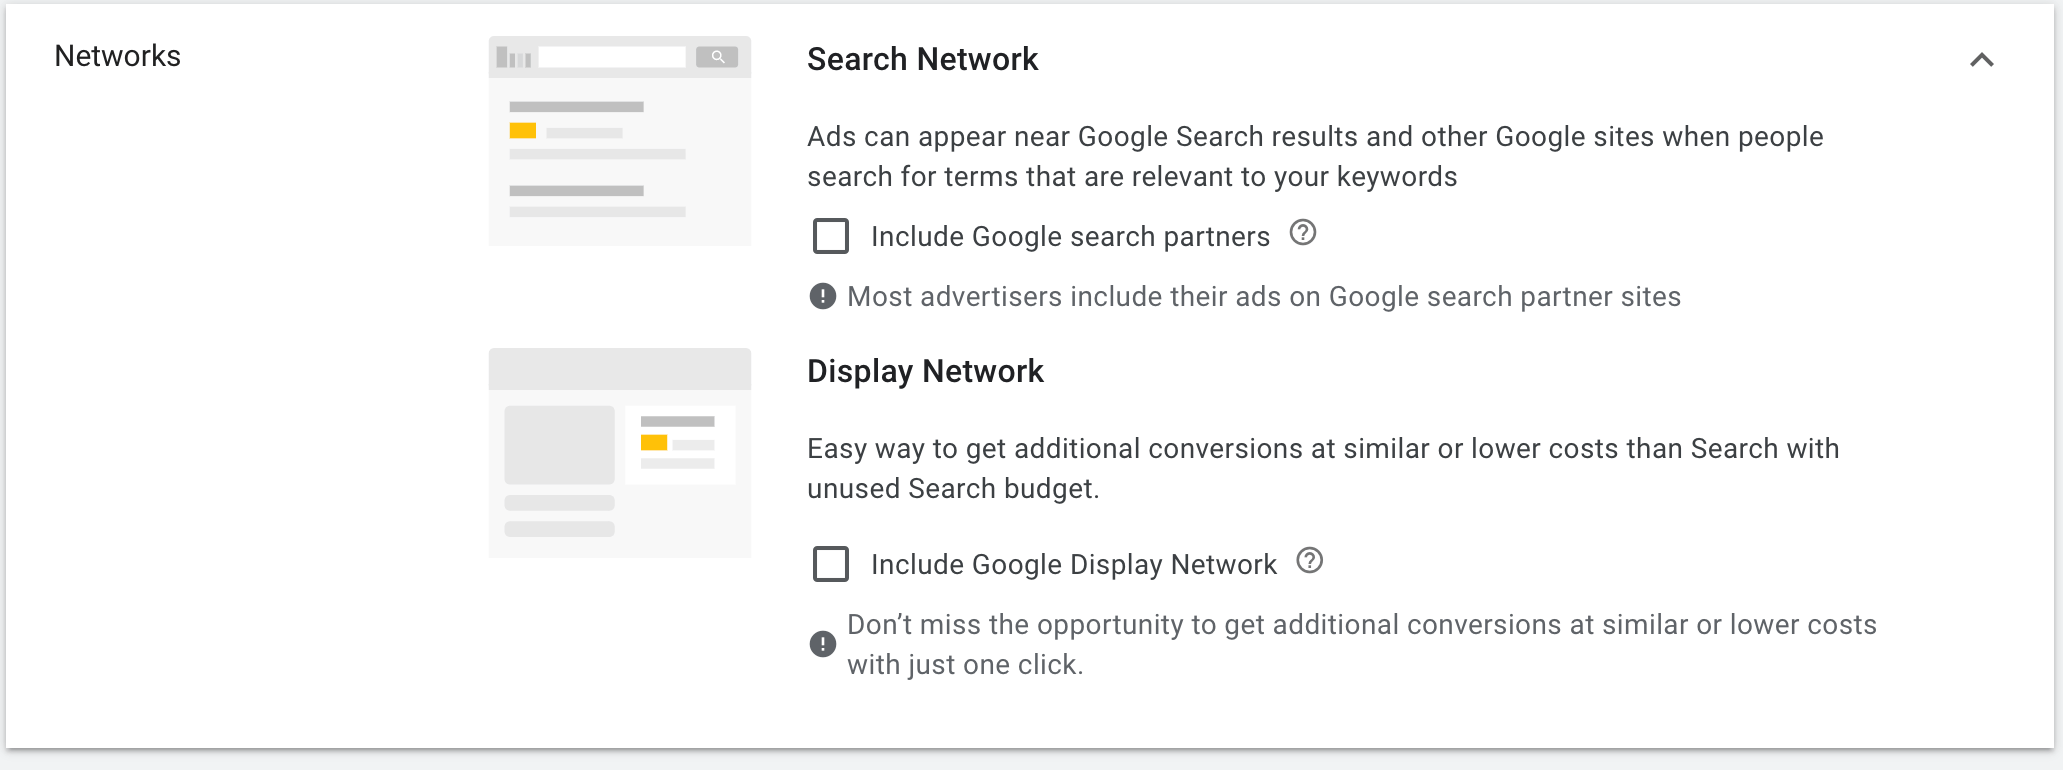 select a network